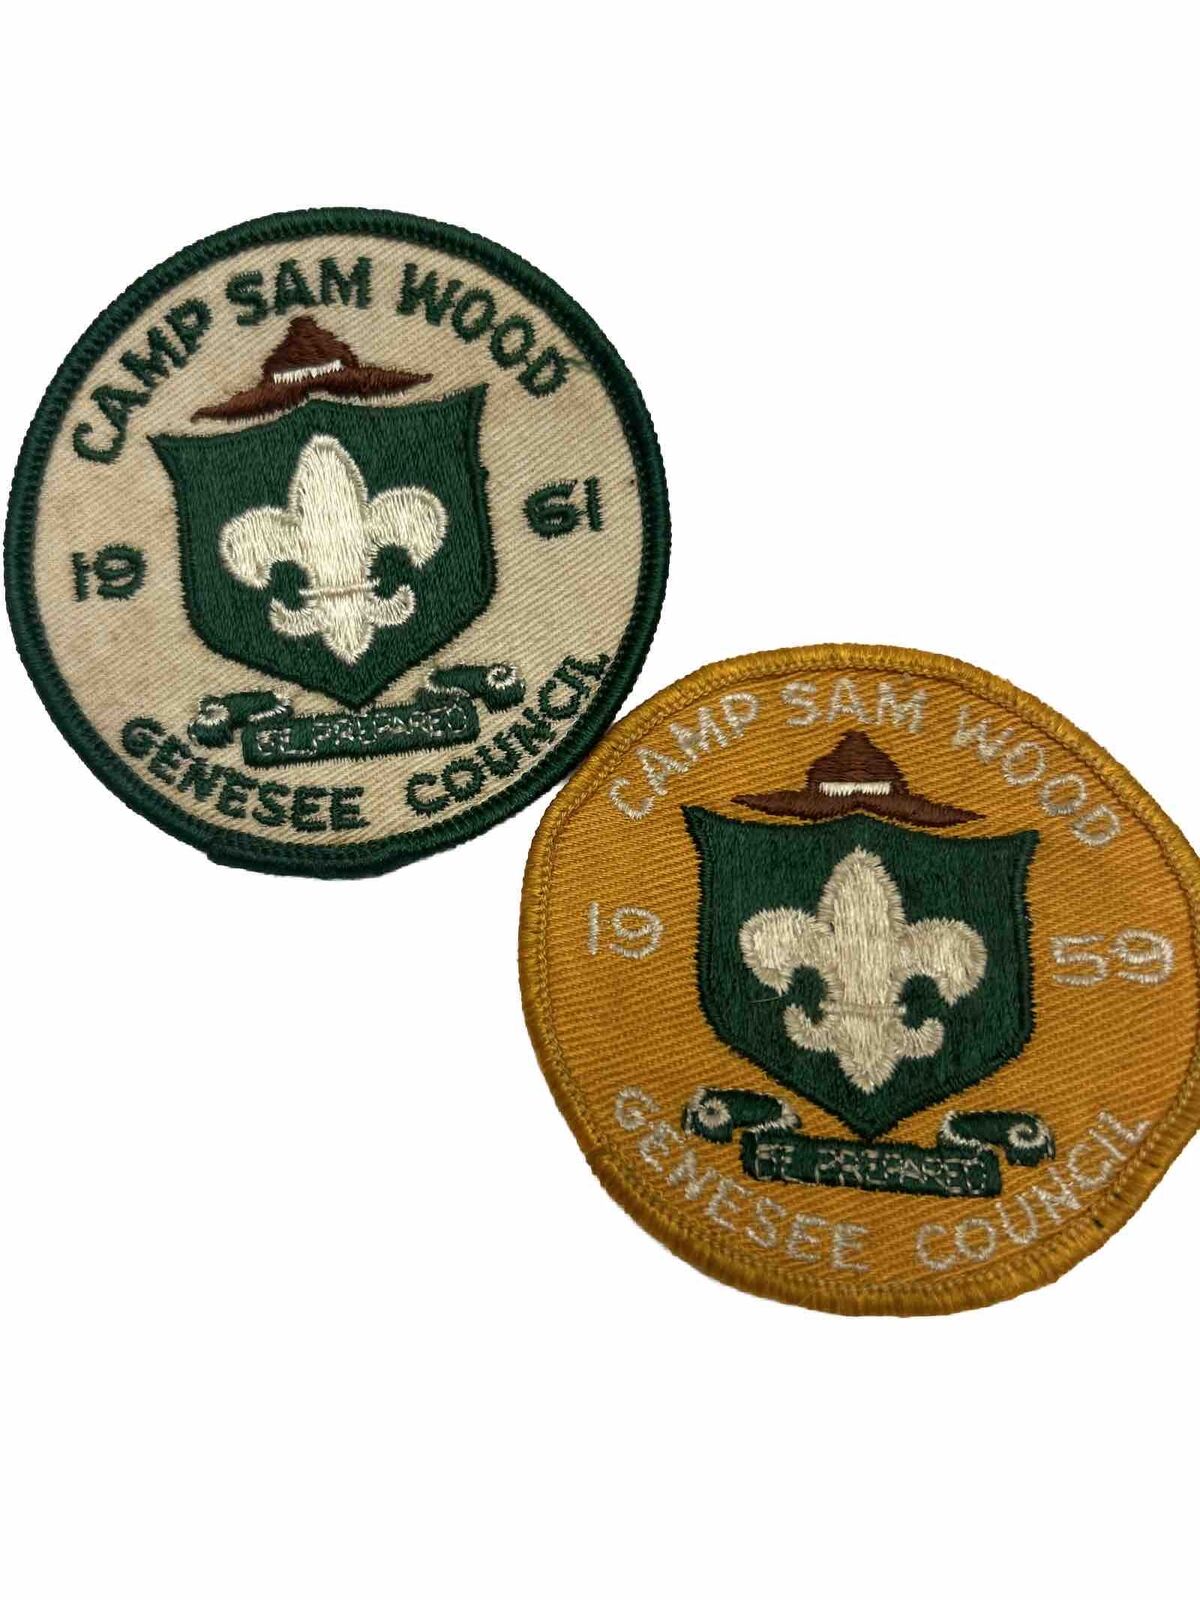 Boy Scout Camp Sam Wood Genesee Council 1959 And 1961